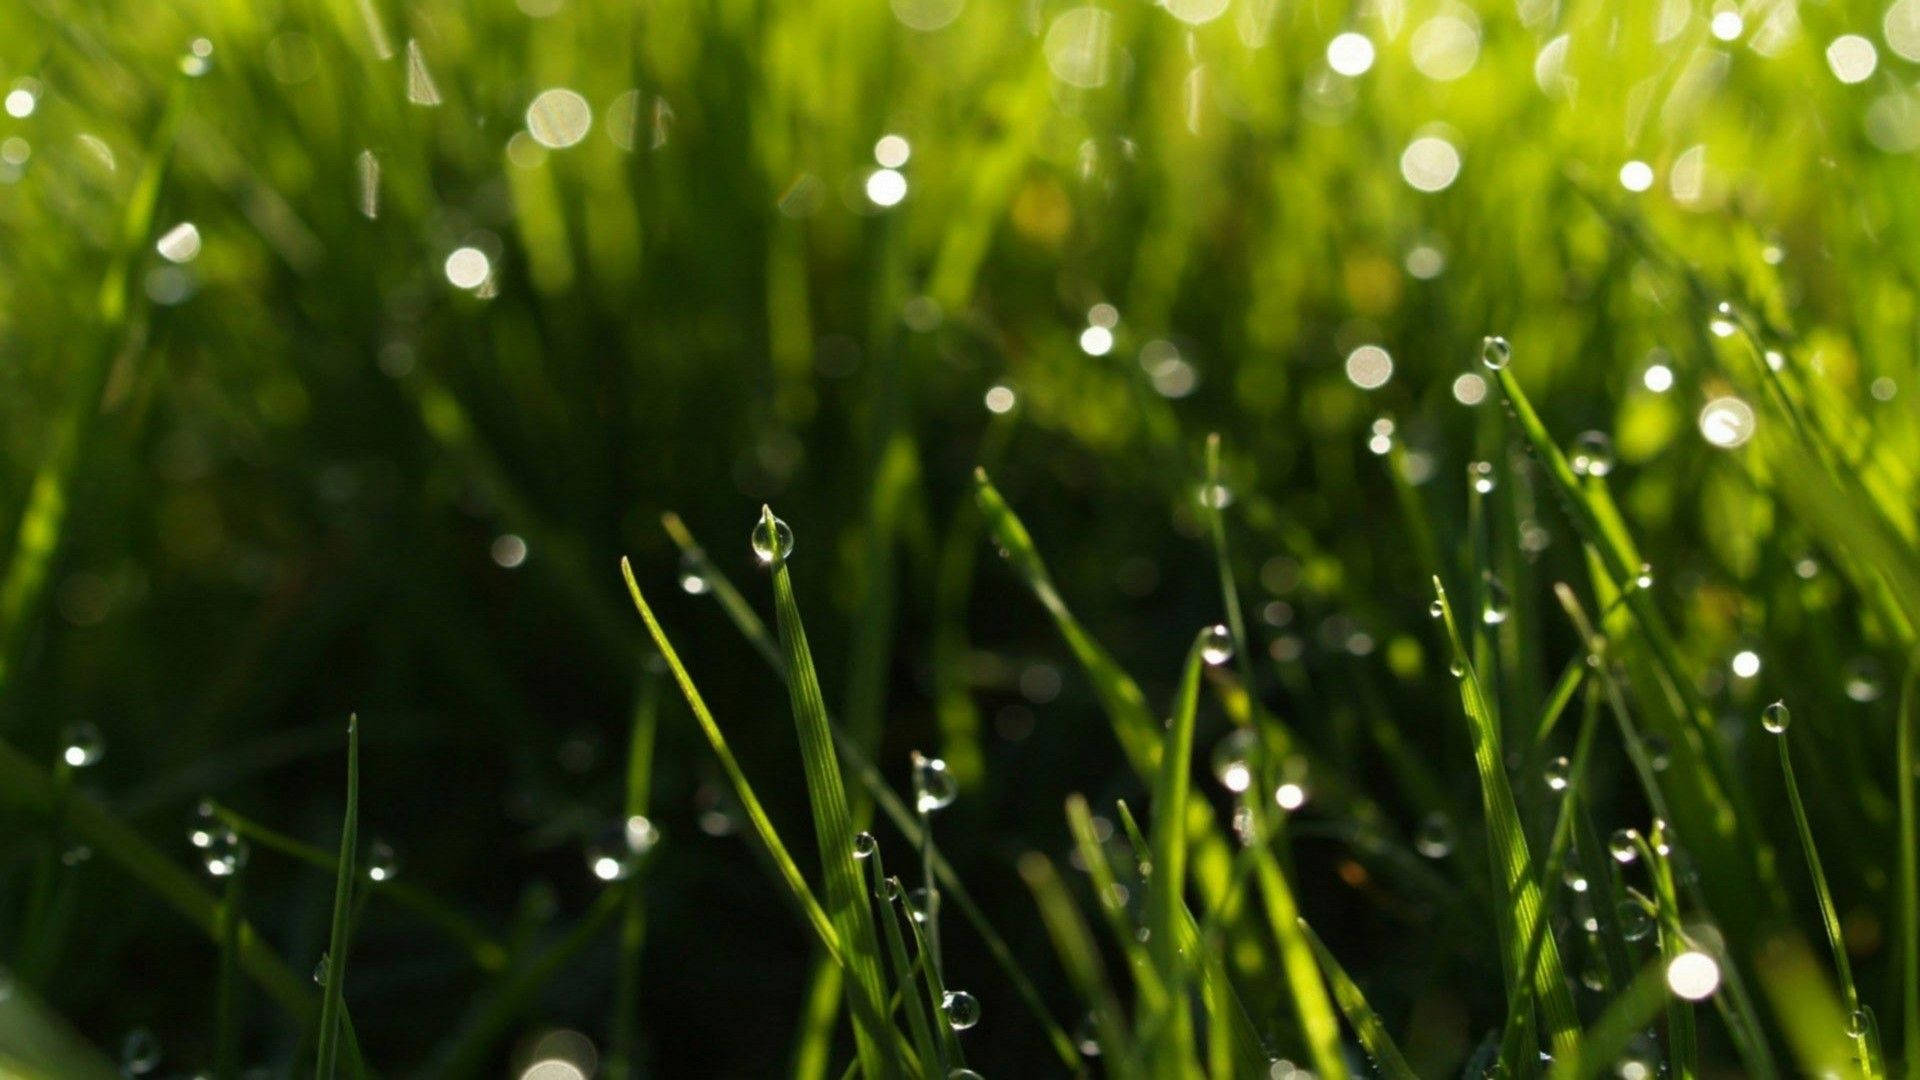 A picturesque scene with raindrops on vibrant green grass. Wallpaper